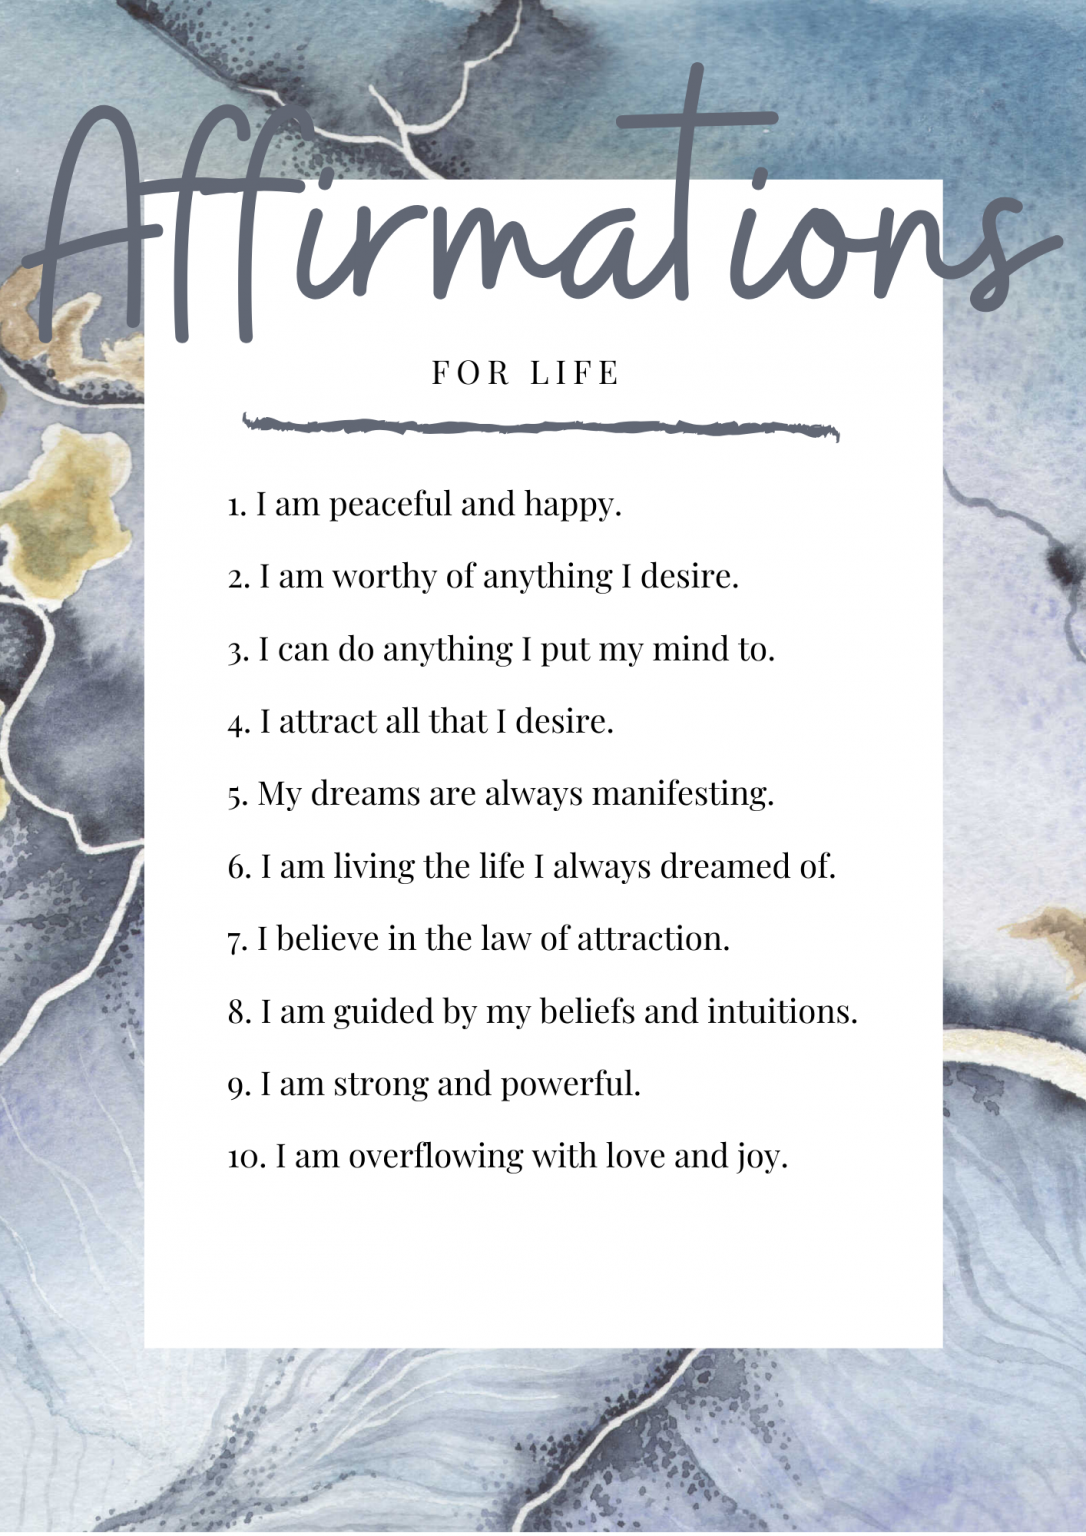 50-powerful-affirmations-for-every-area-of-your-life-and-tips-on-how-to